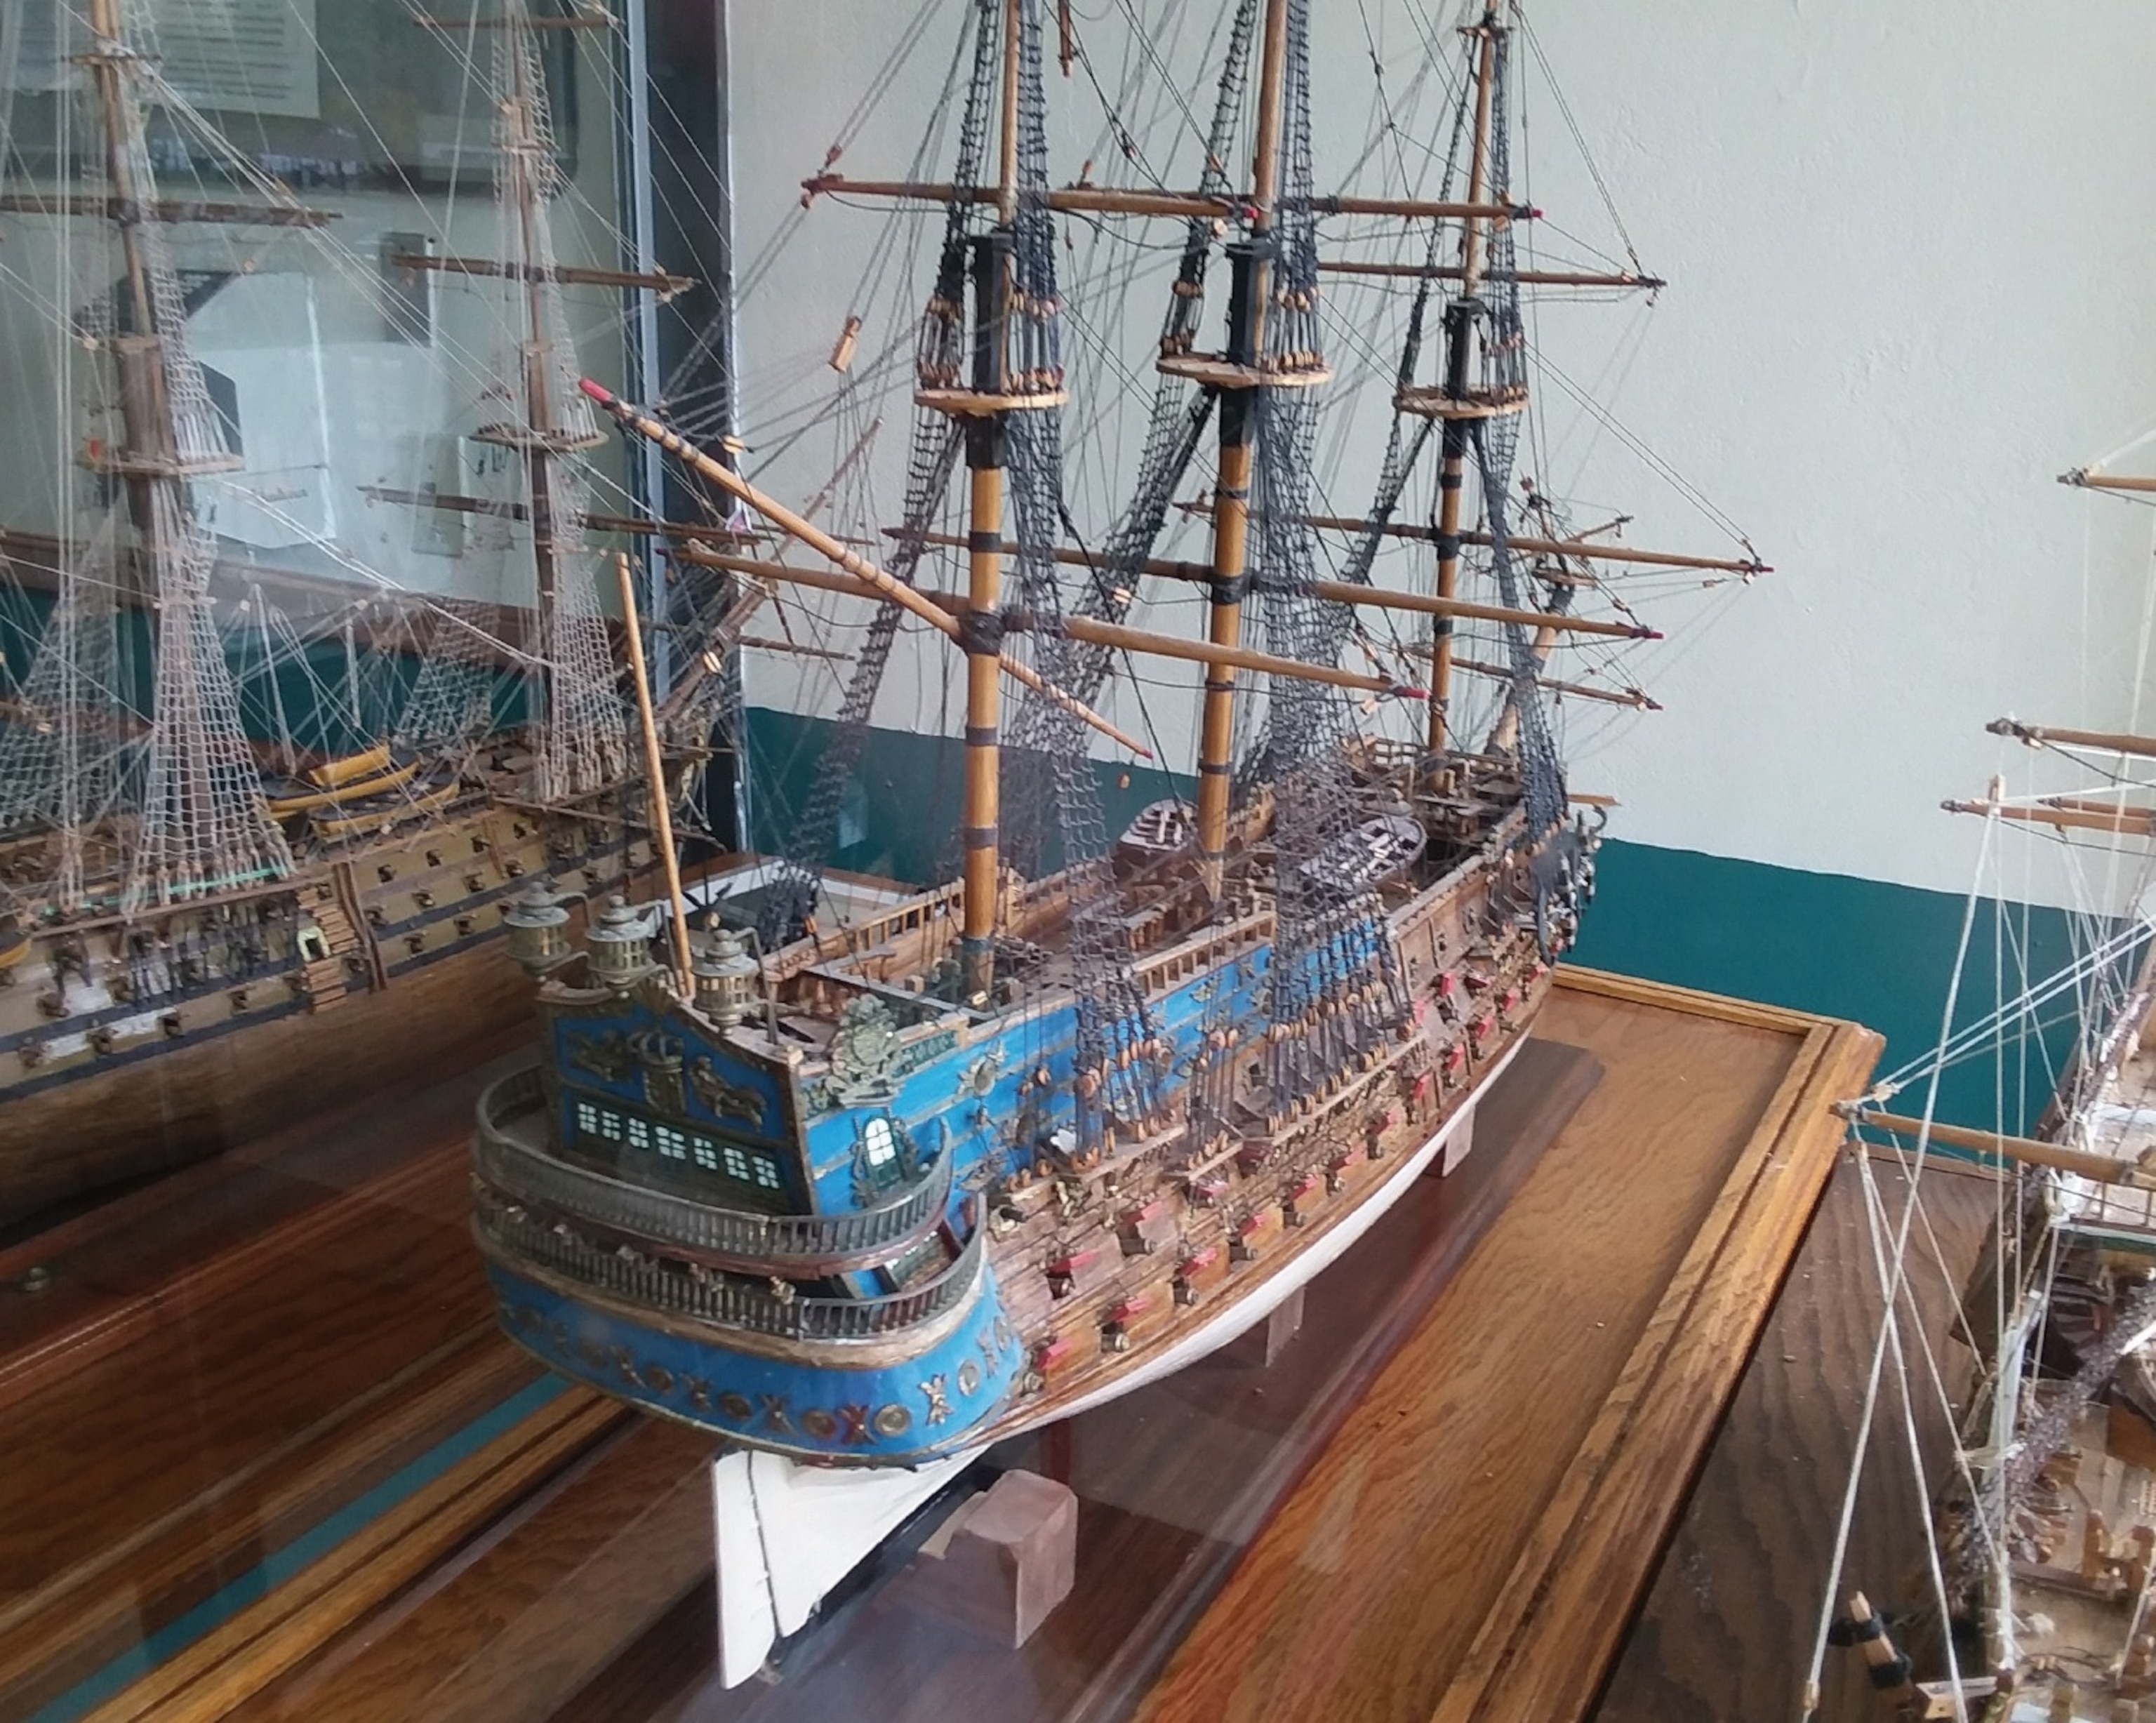 PHOTO: A model ship built by John Schapers, who died at age 90 from covid-related causes. Building models was “what he loved to do,” says his daughter, Trever. “He was a genius with his hands.” 